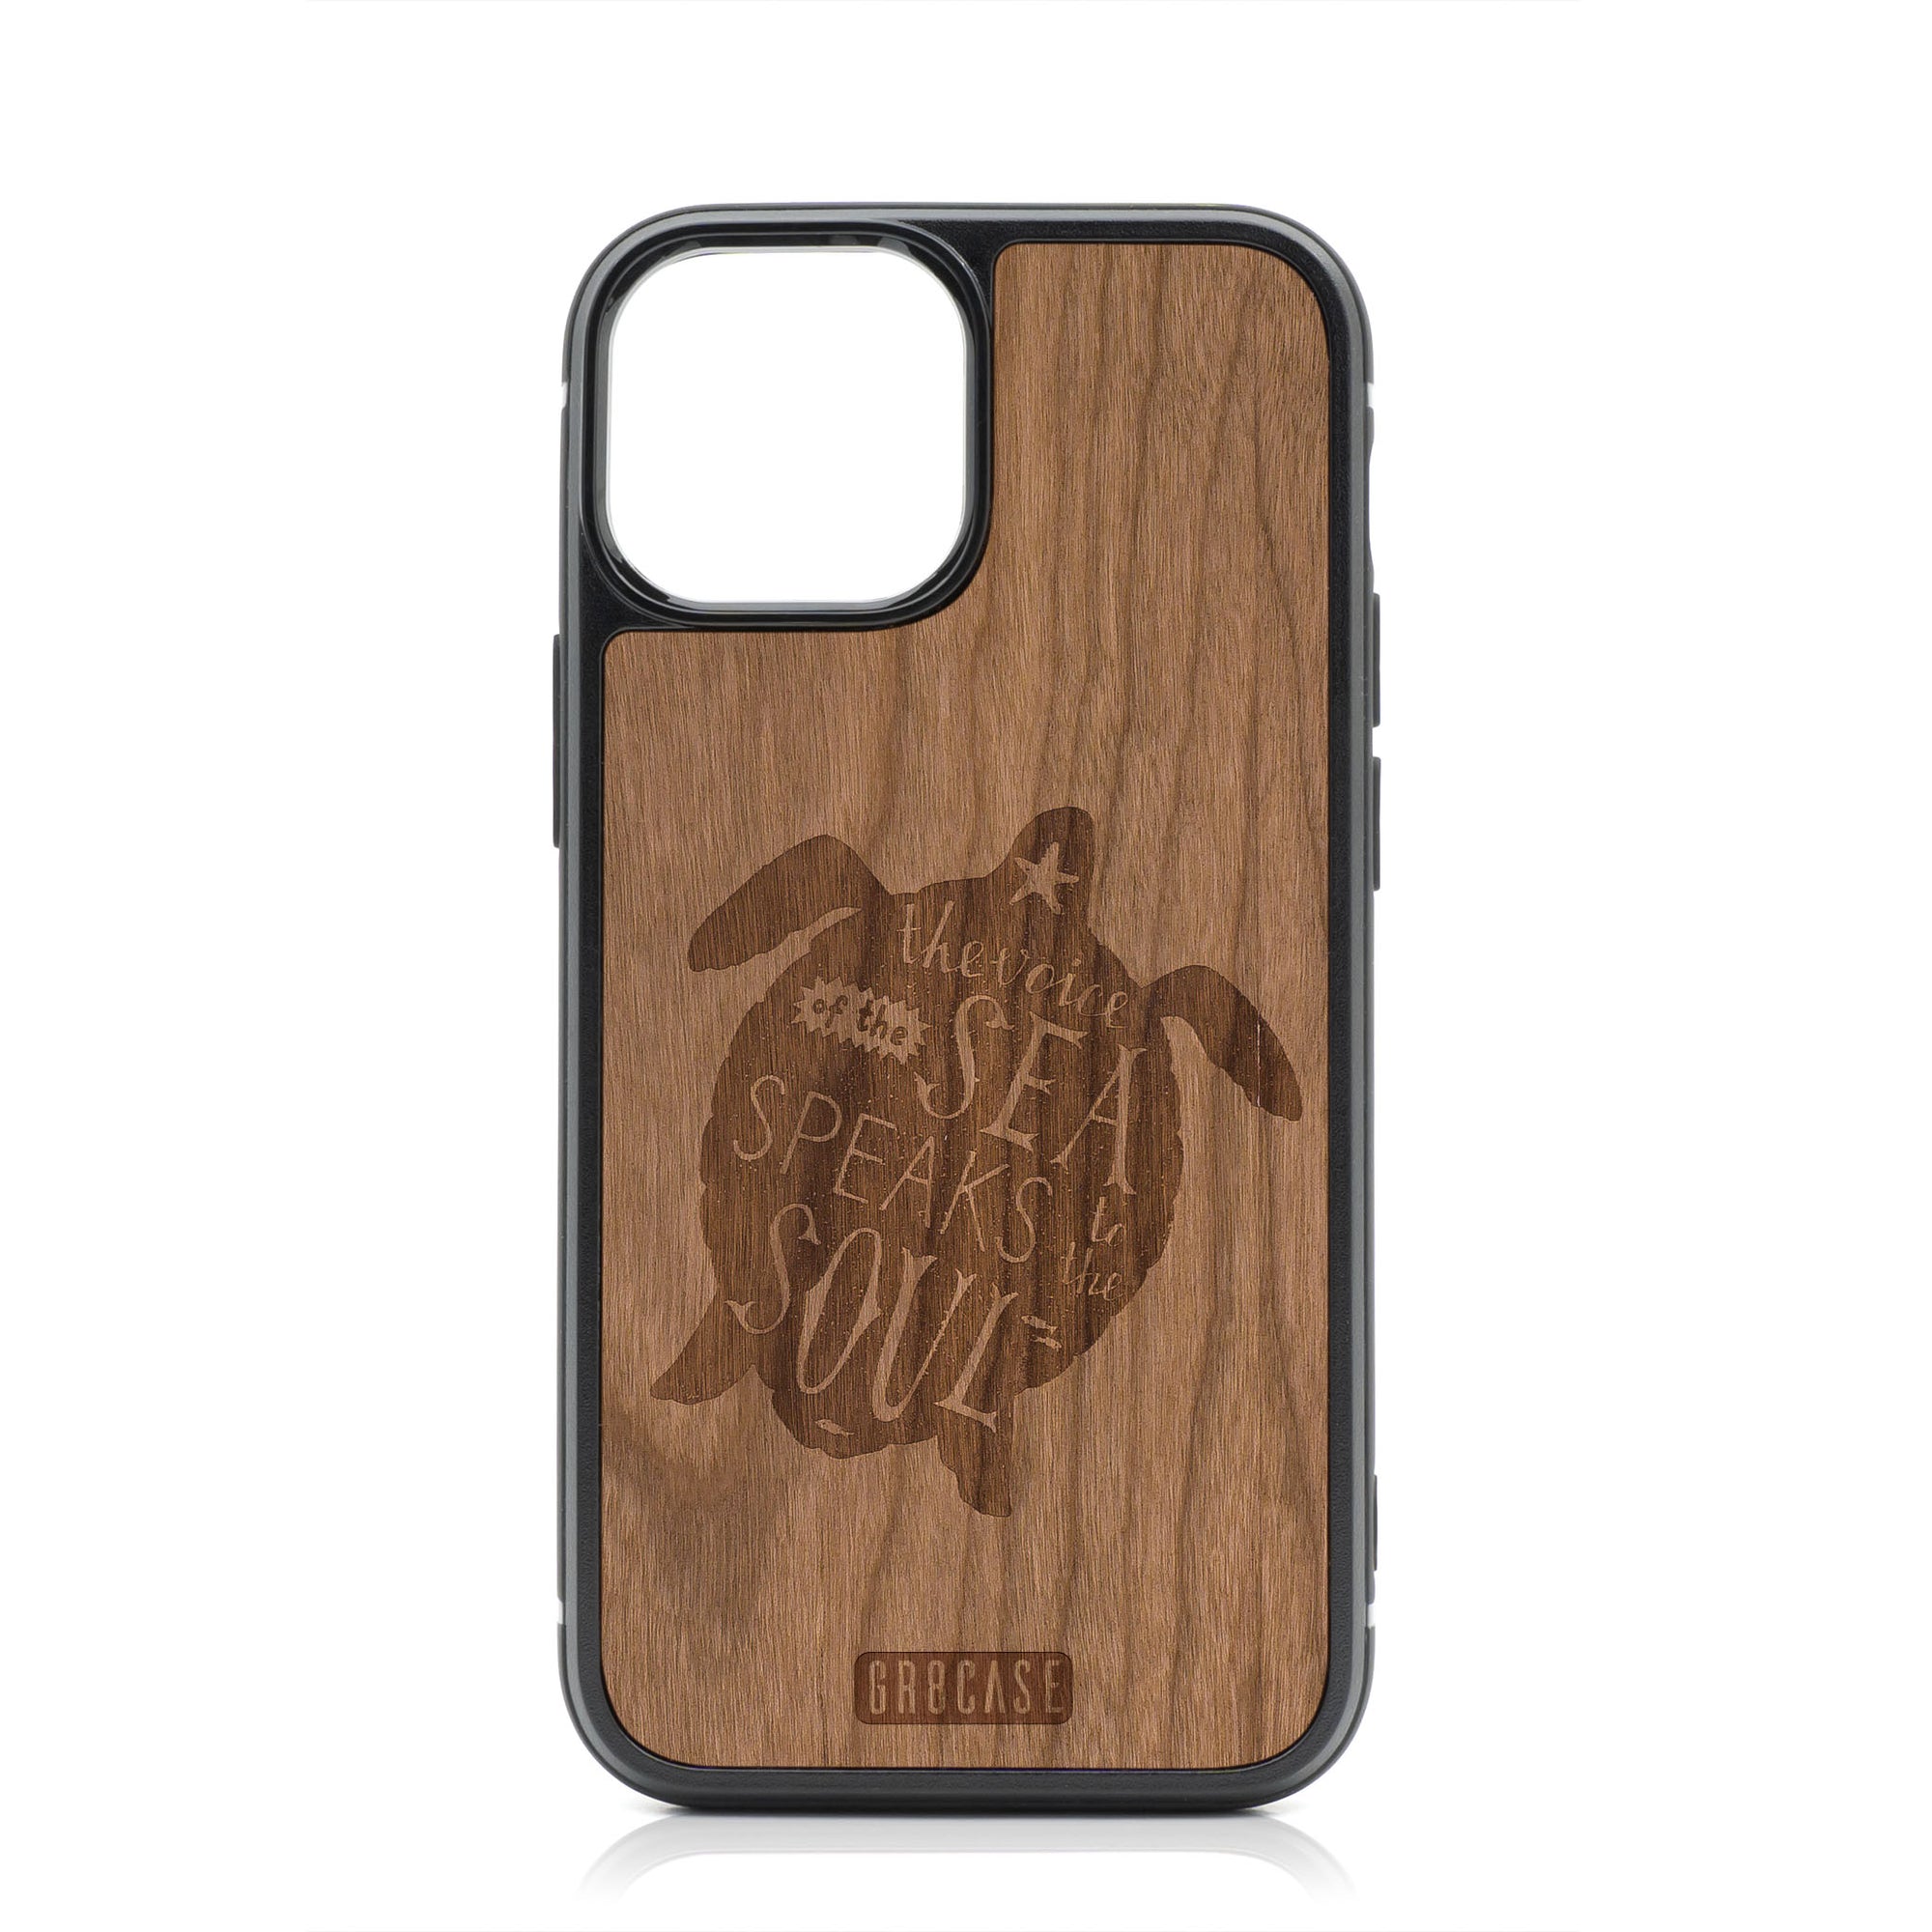 The Voice Of The Sea Speaks To The Soul (Turtle) Design Wood Case For iPhone 13 Mini